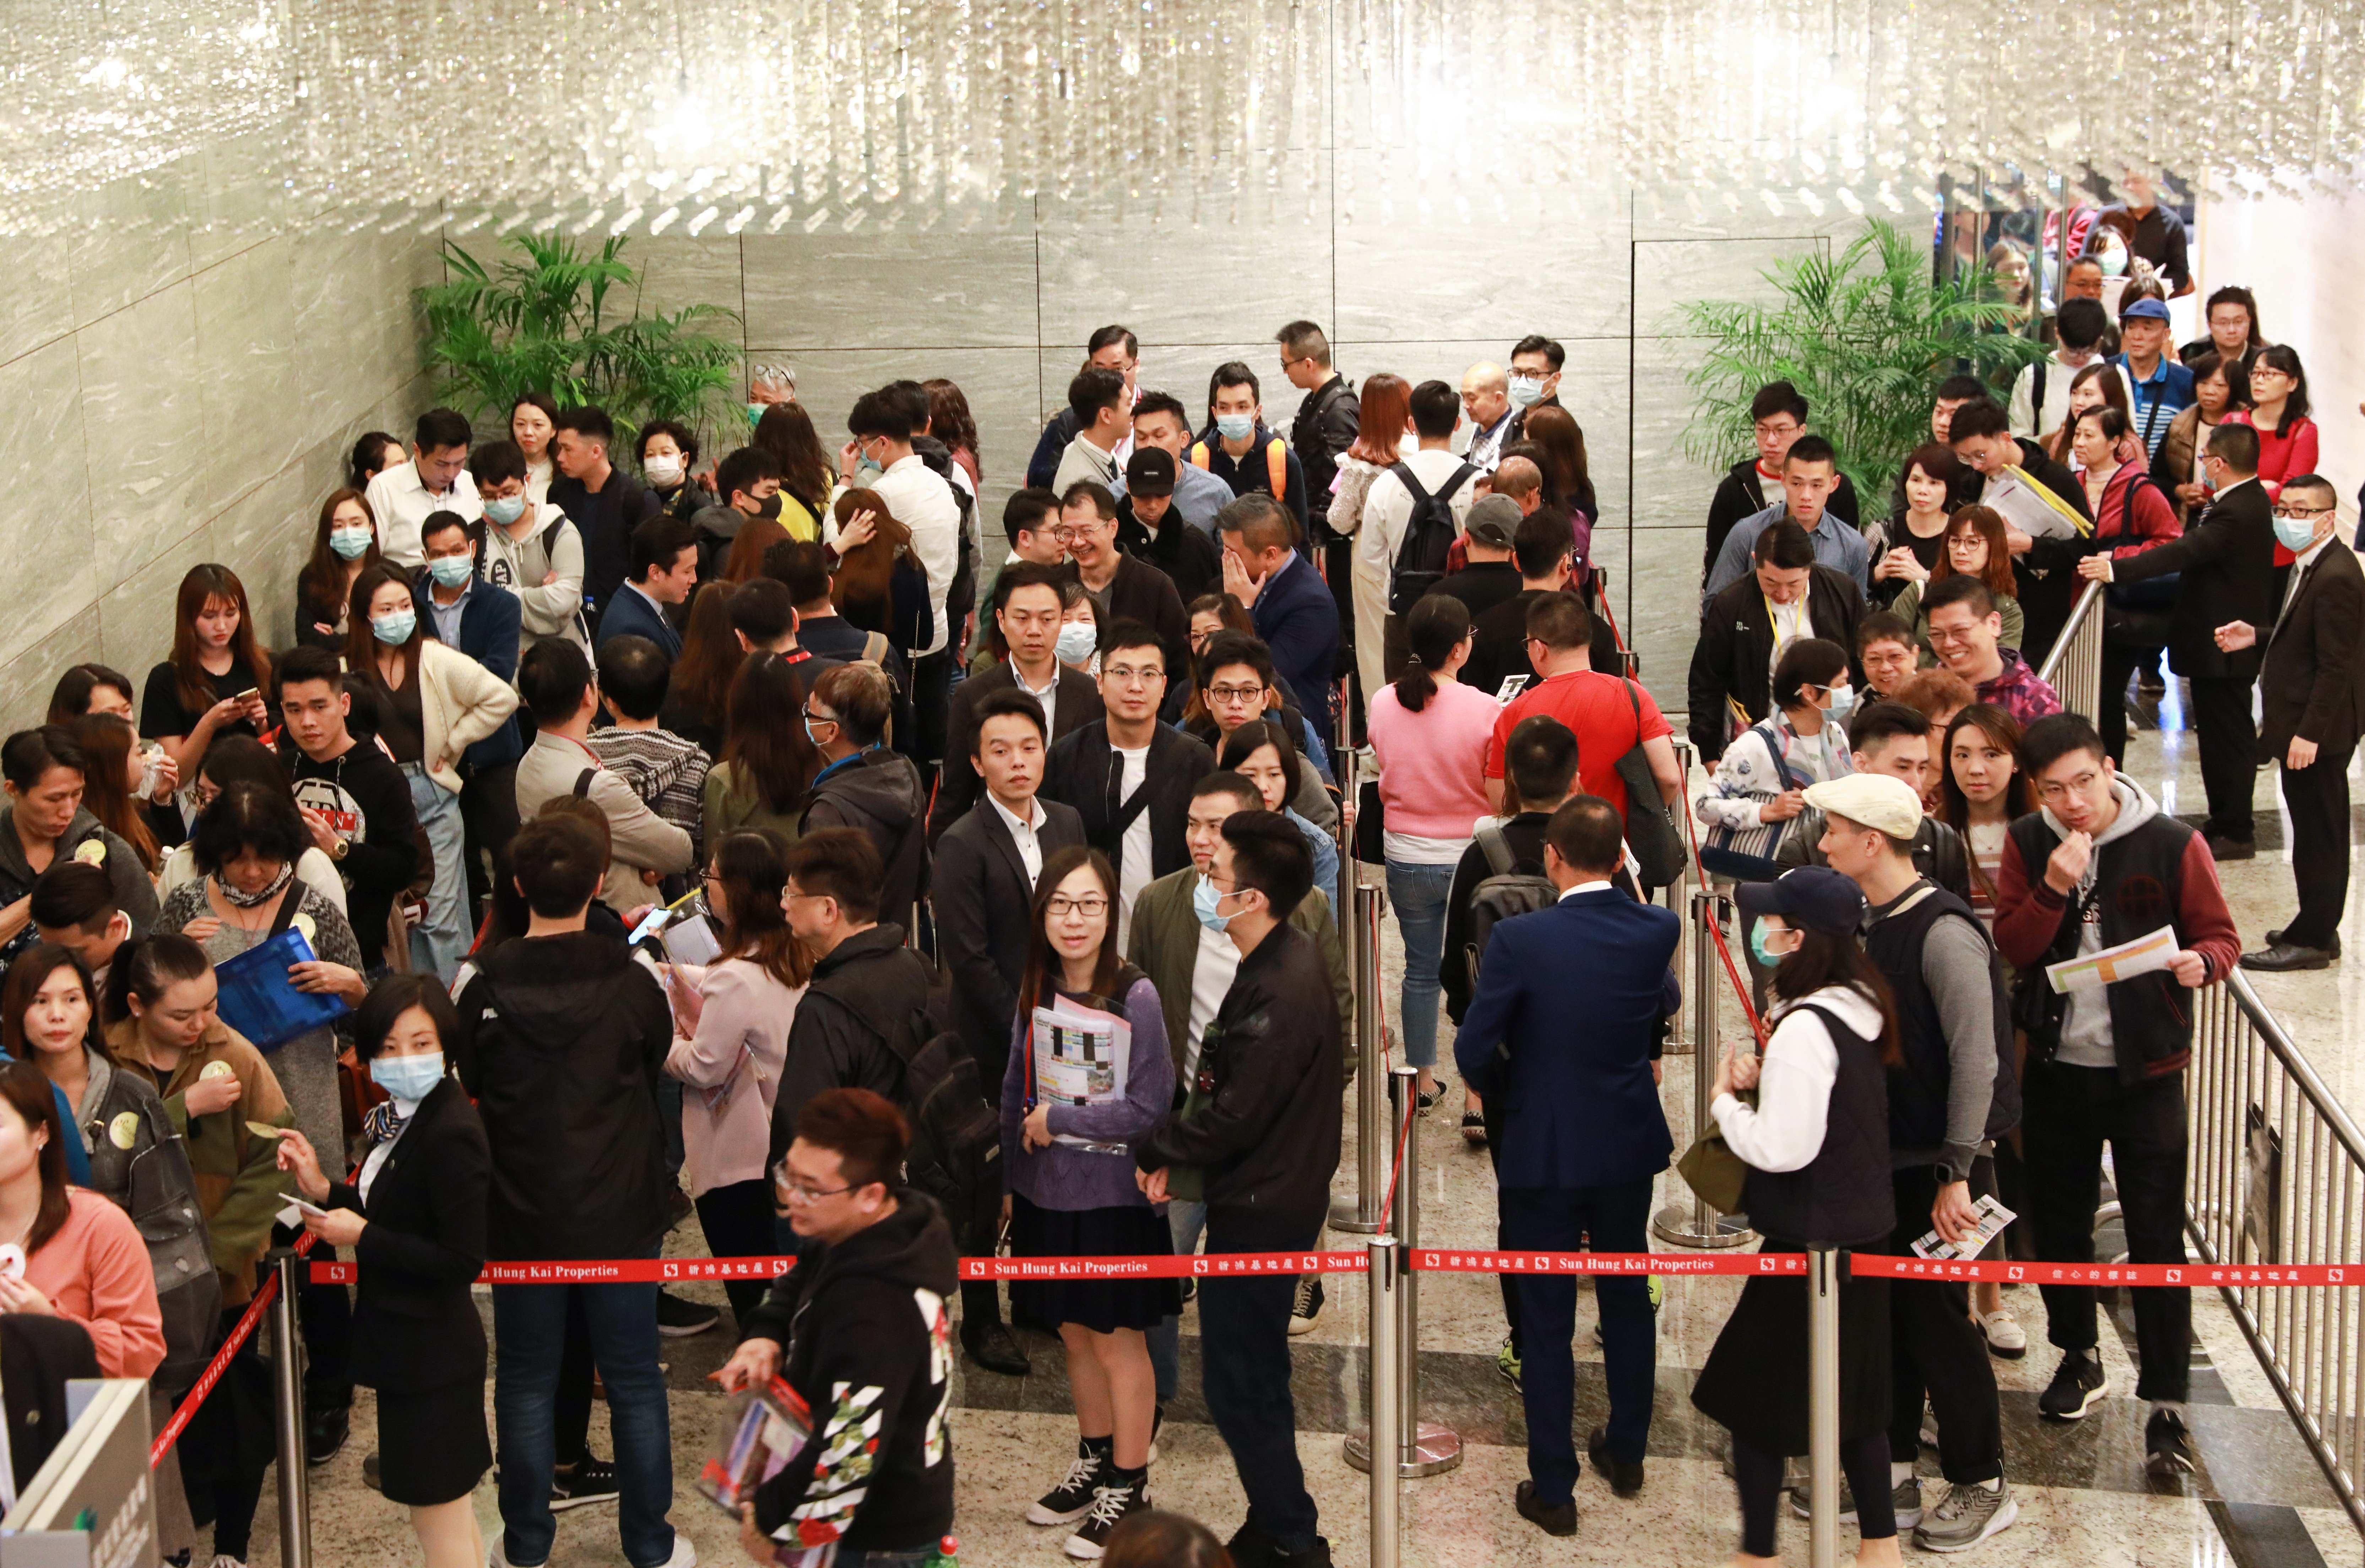 Potential buyers queue up for Sun Hung Kai Properties’ offer of 335 flats at its Wetland Seasons Park residential project, on January 11. Ricacorp expects new flat sales to boost property transactions this year. Photo: May Tse